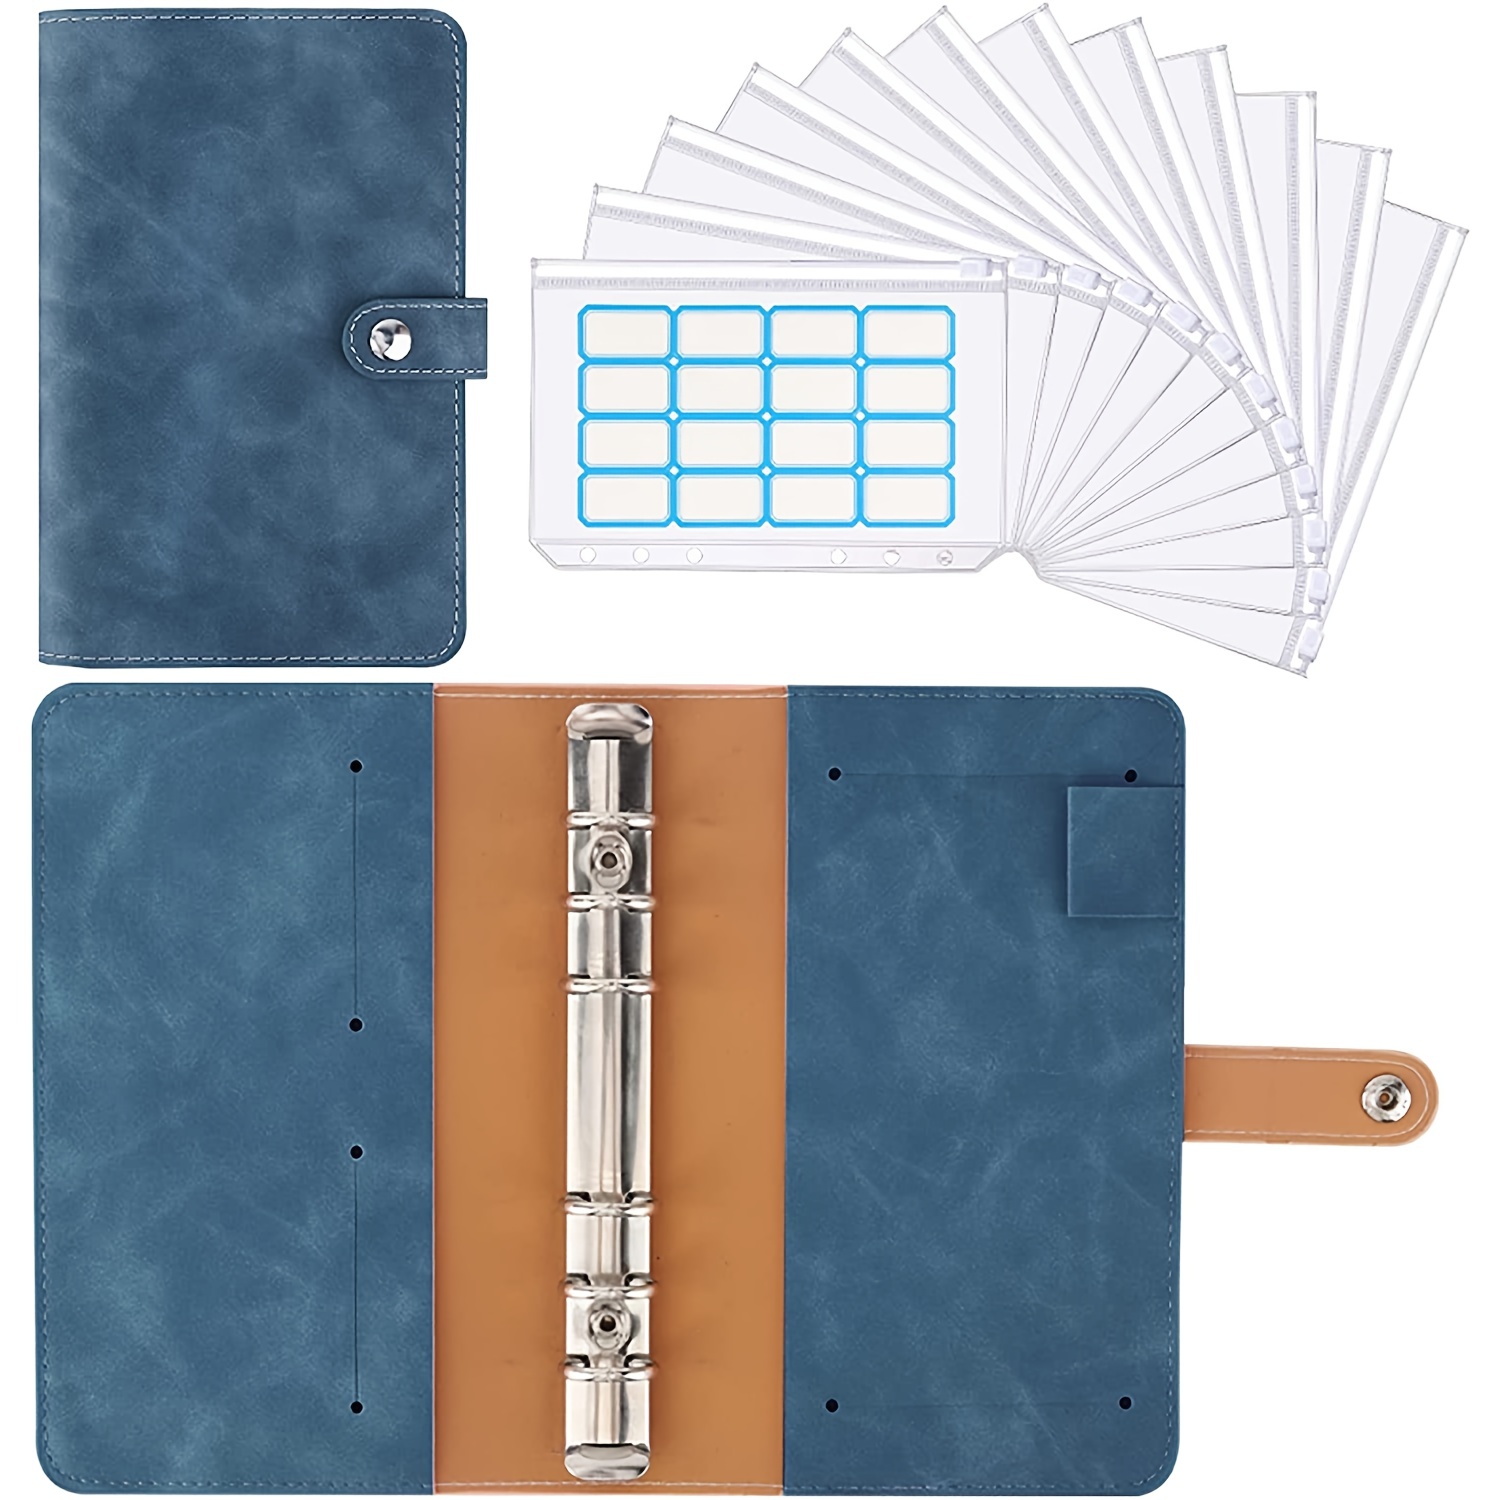 Complete Kit A6 Check Design Binder With Stickers and 6 Zip 